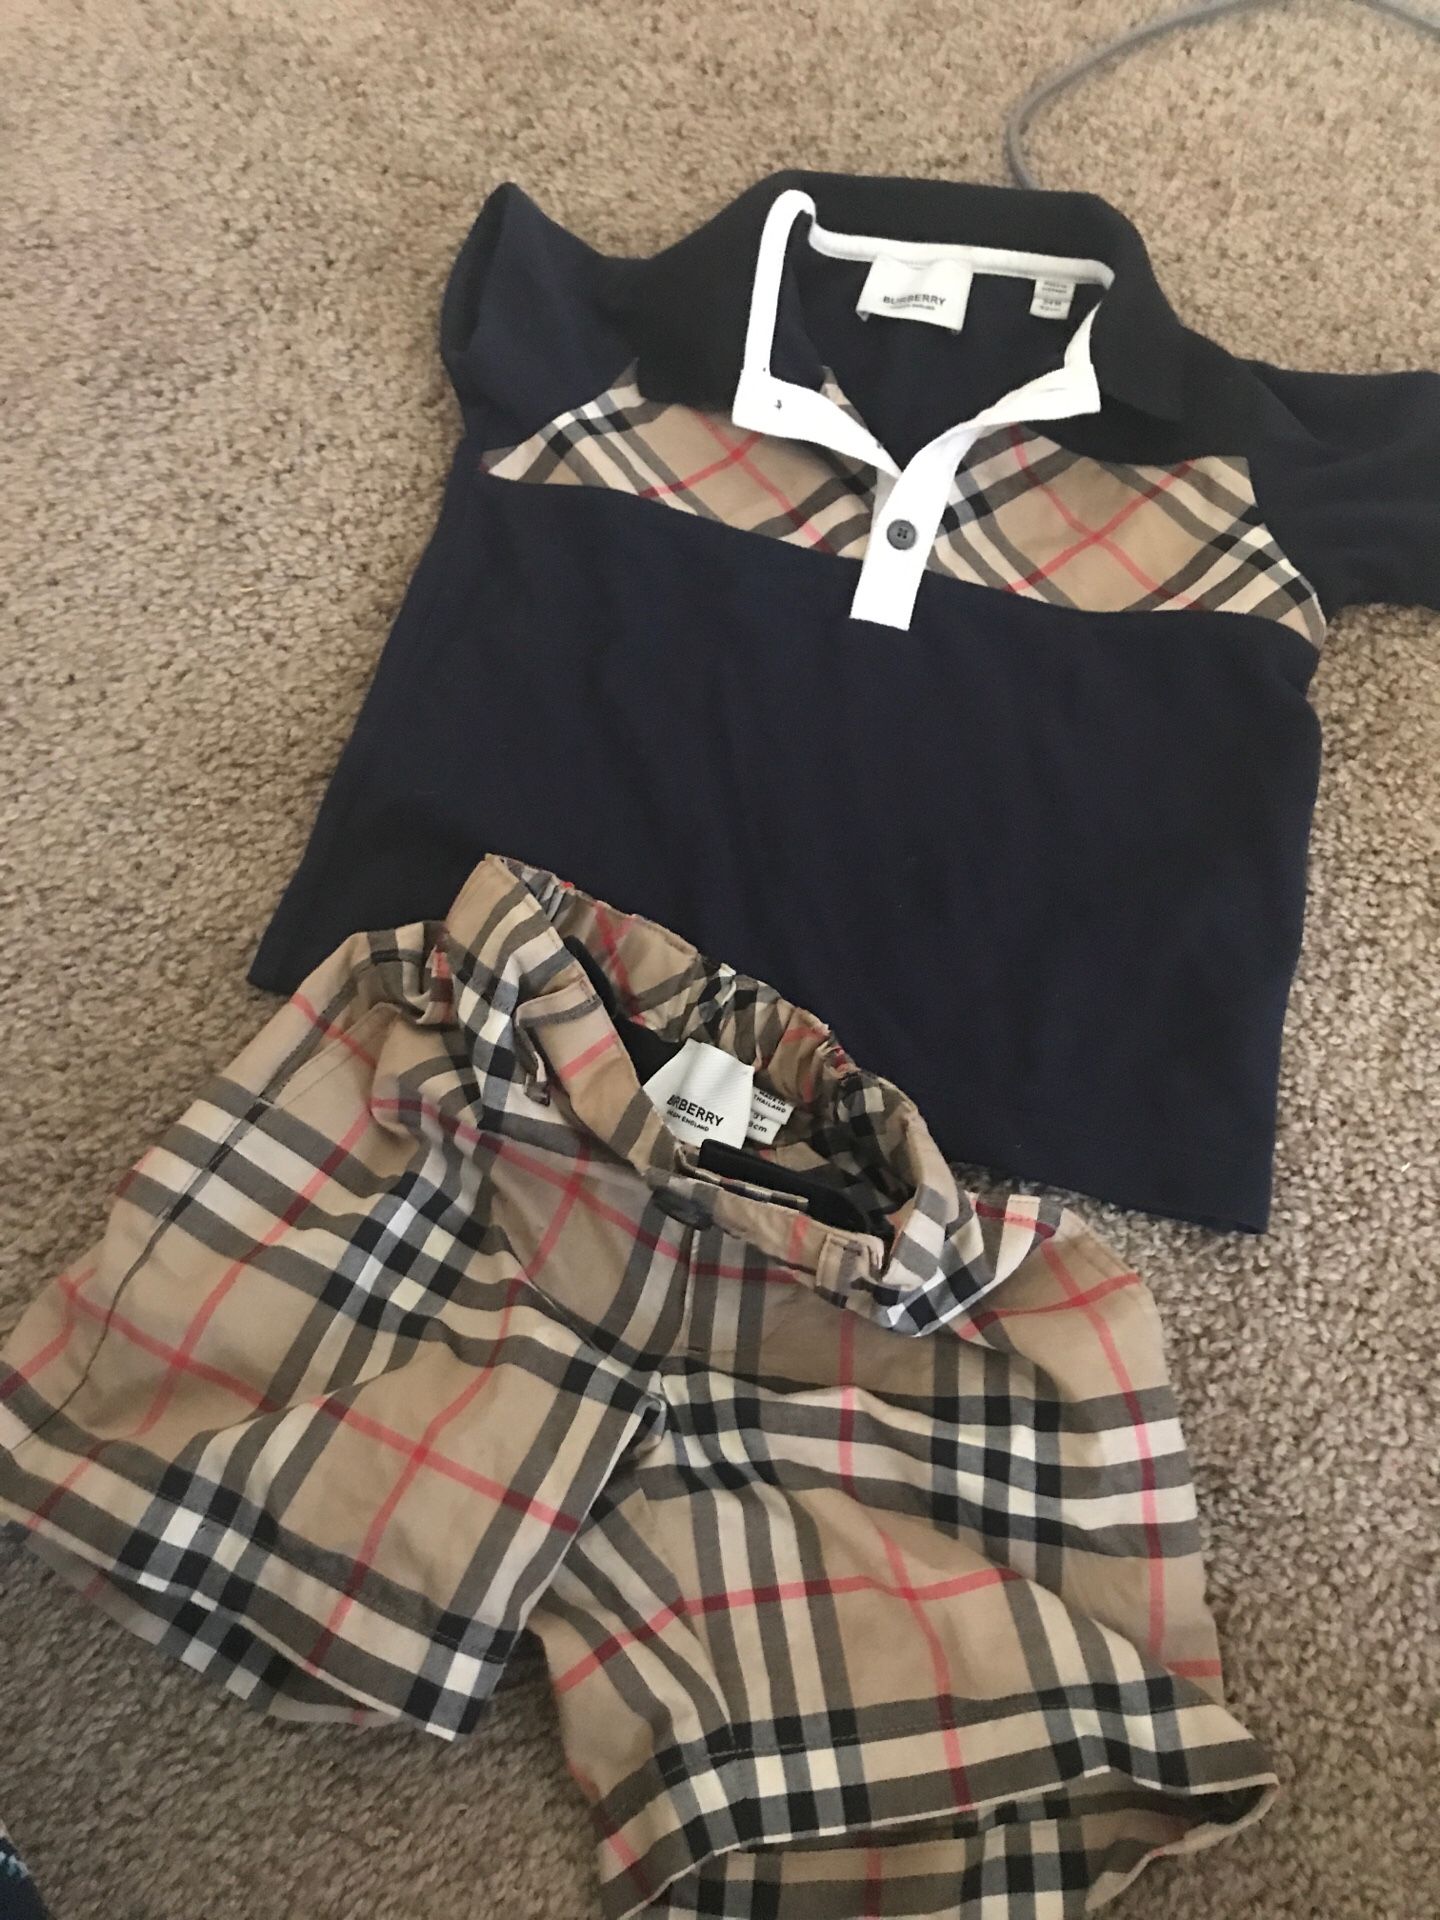 Burberry baby outfit